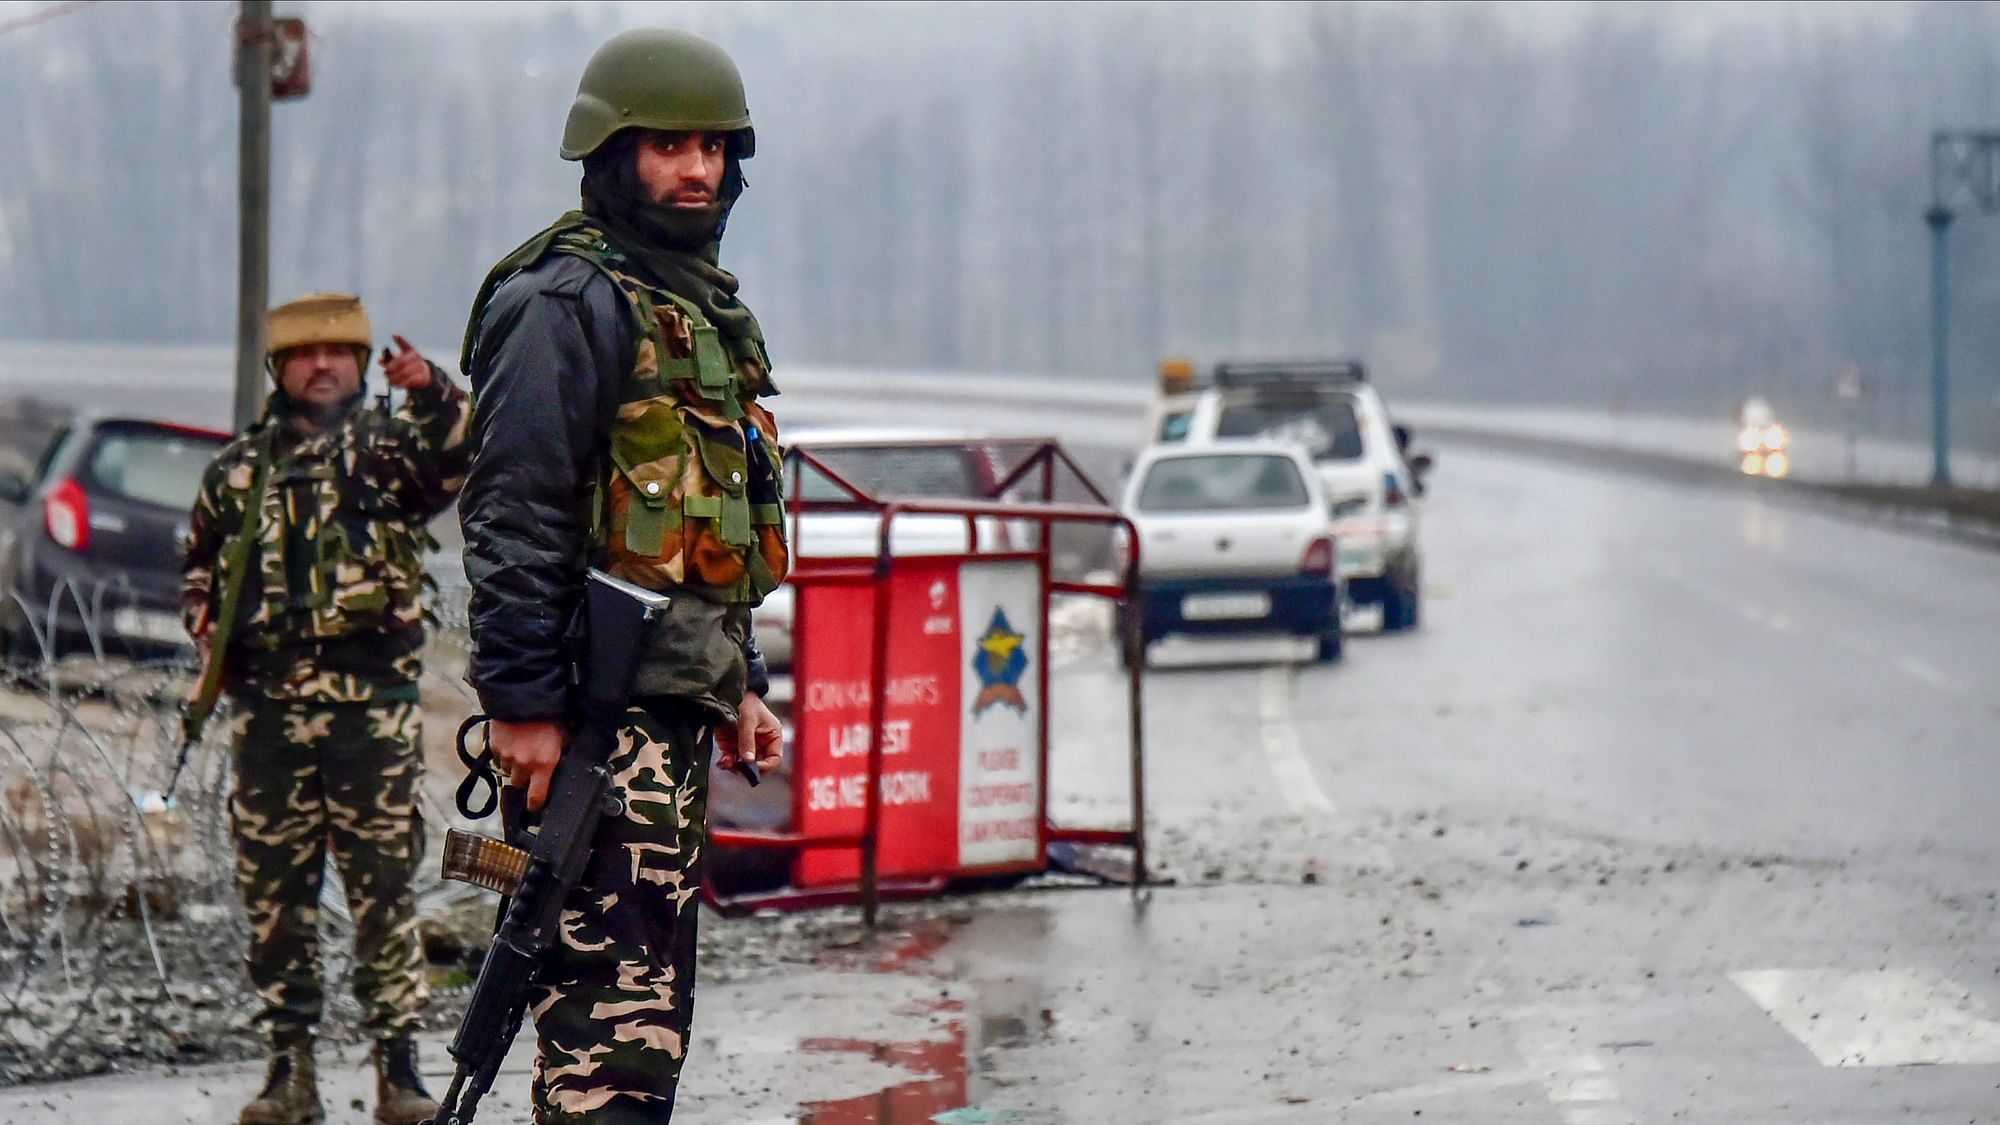 Army soldiers stand guard near the site of suicide bomb attack at Lathepora Awantipora in Pulwama district of south Kashmir, Thursday, 14 February 2019. At least 30 CRPF jawans were killed and dozens other injured when a CRPF convoy was attacked.